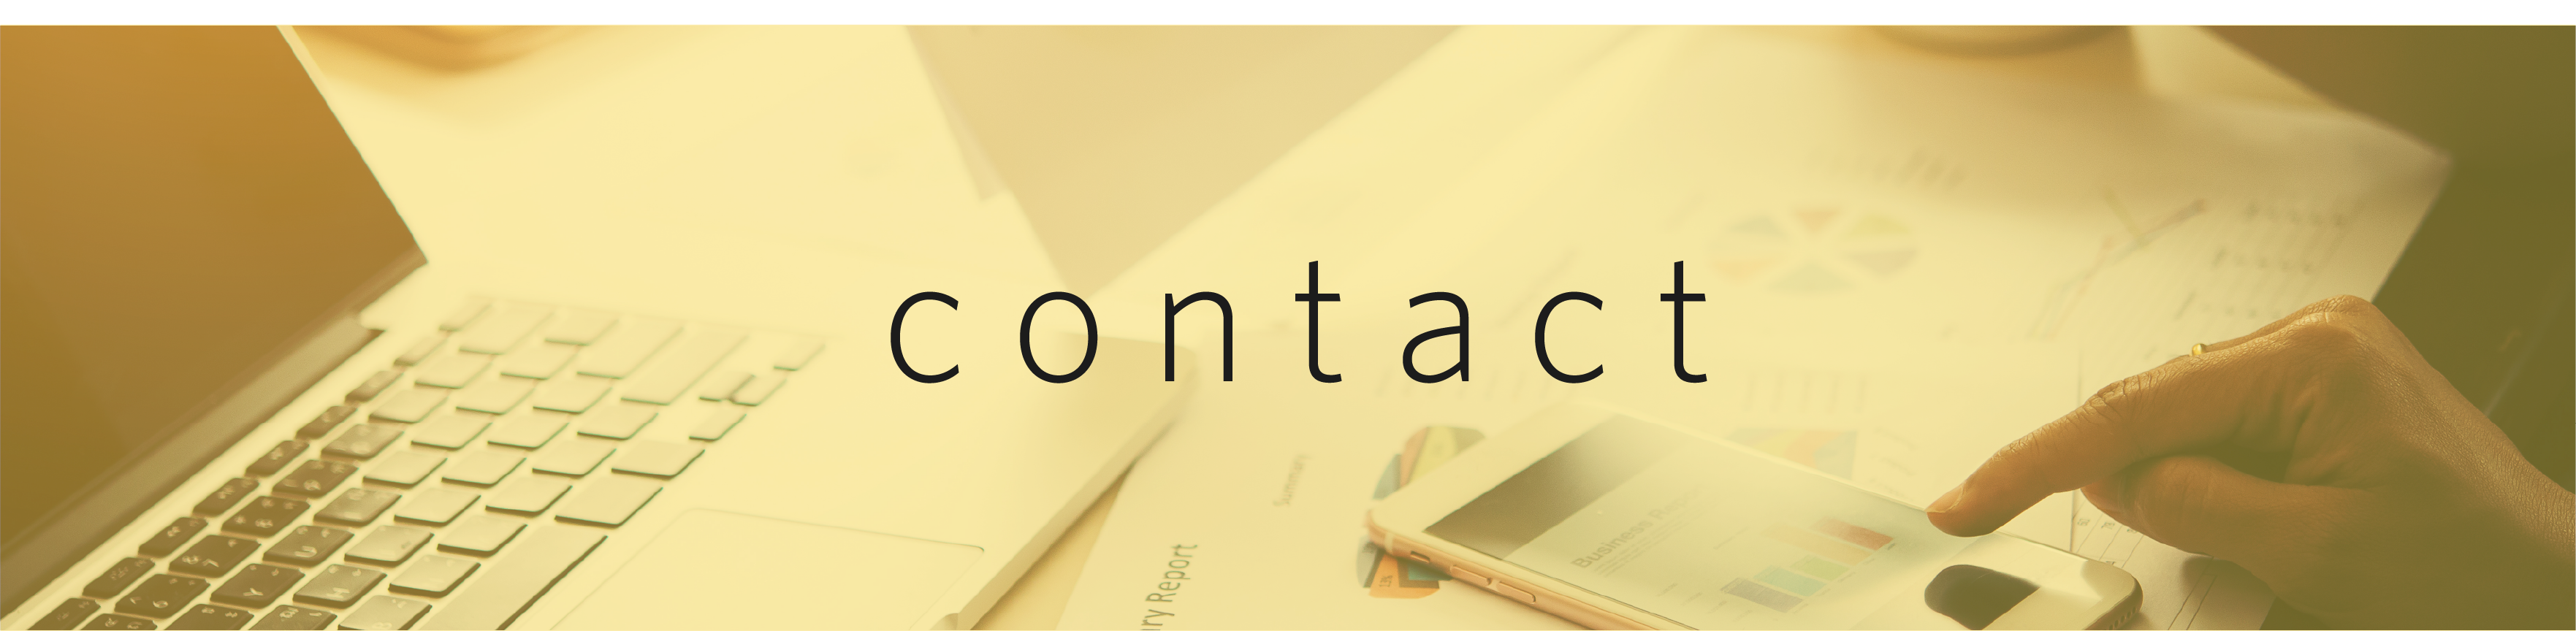 contact banner _ final@3x.png